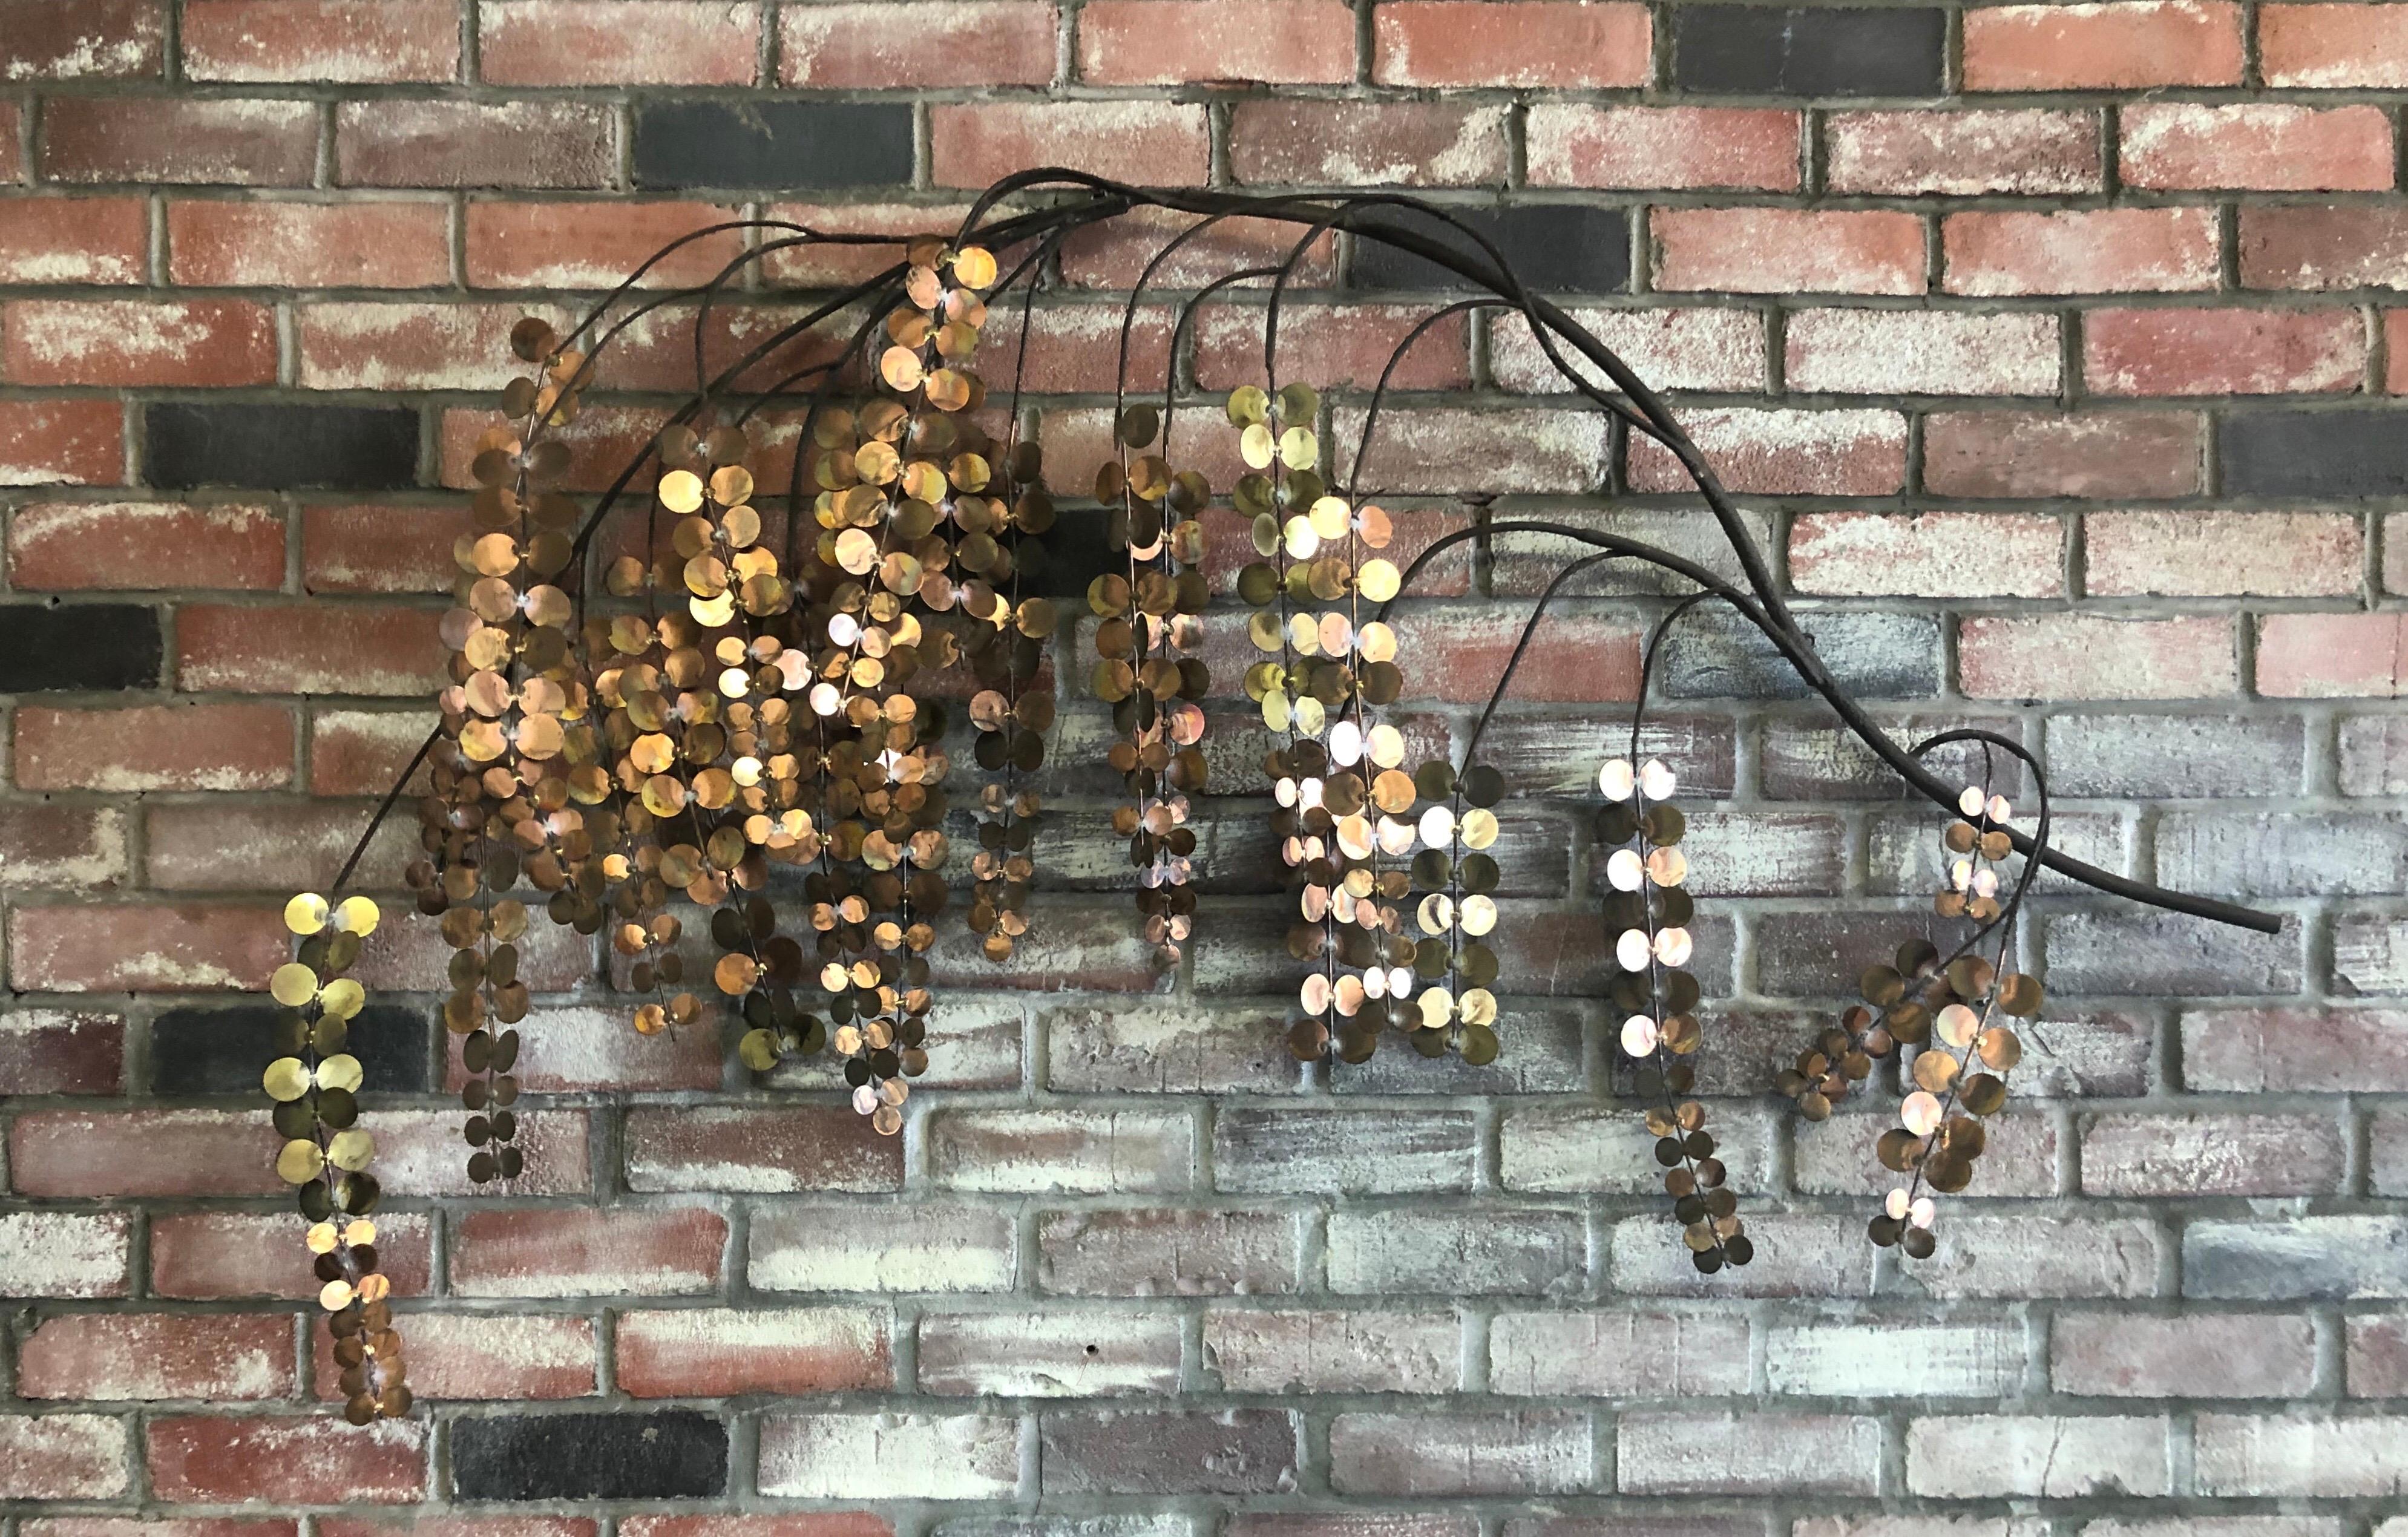 Unique and quite rare mixed metal wall sculpture by C. Jere for Artisan House, circa 1970s. The piece, depicting a tree branch with hanging leaves, is in very good condition and has great color and craftsmanship. The sculpture displays patina